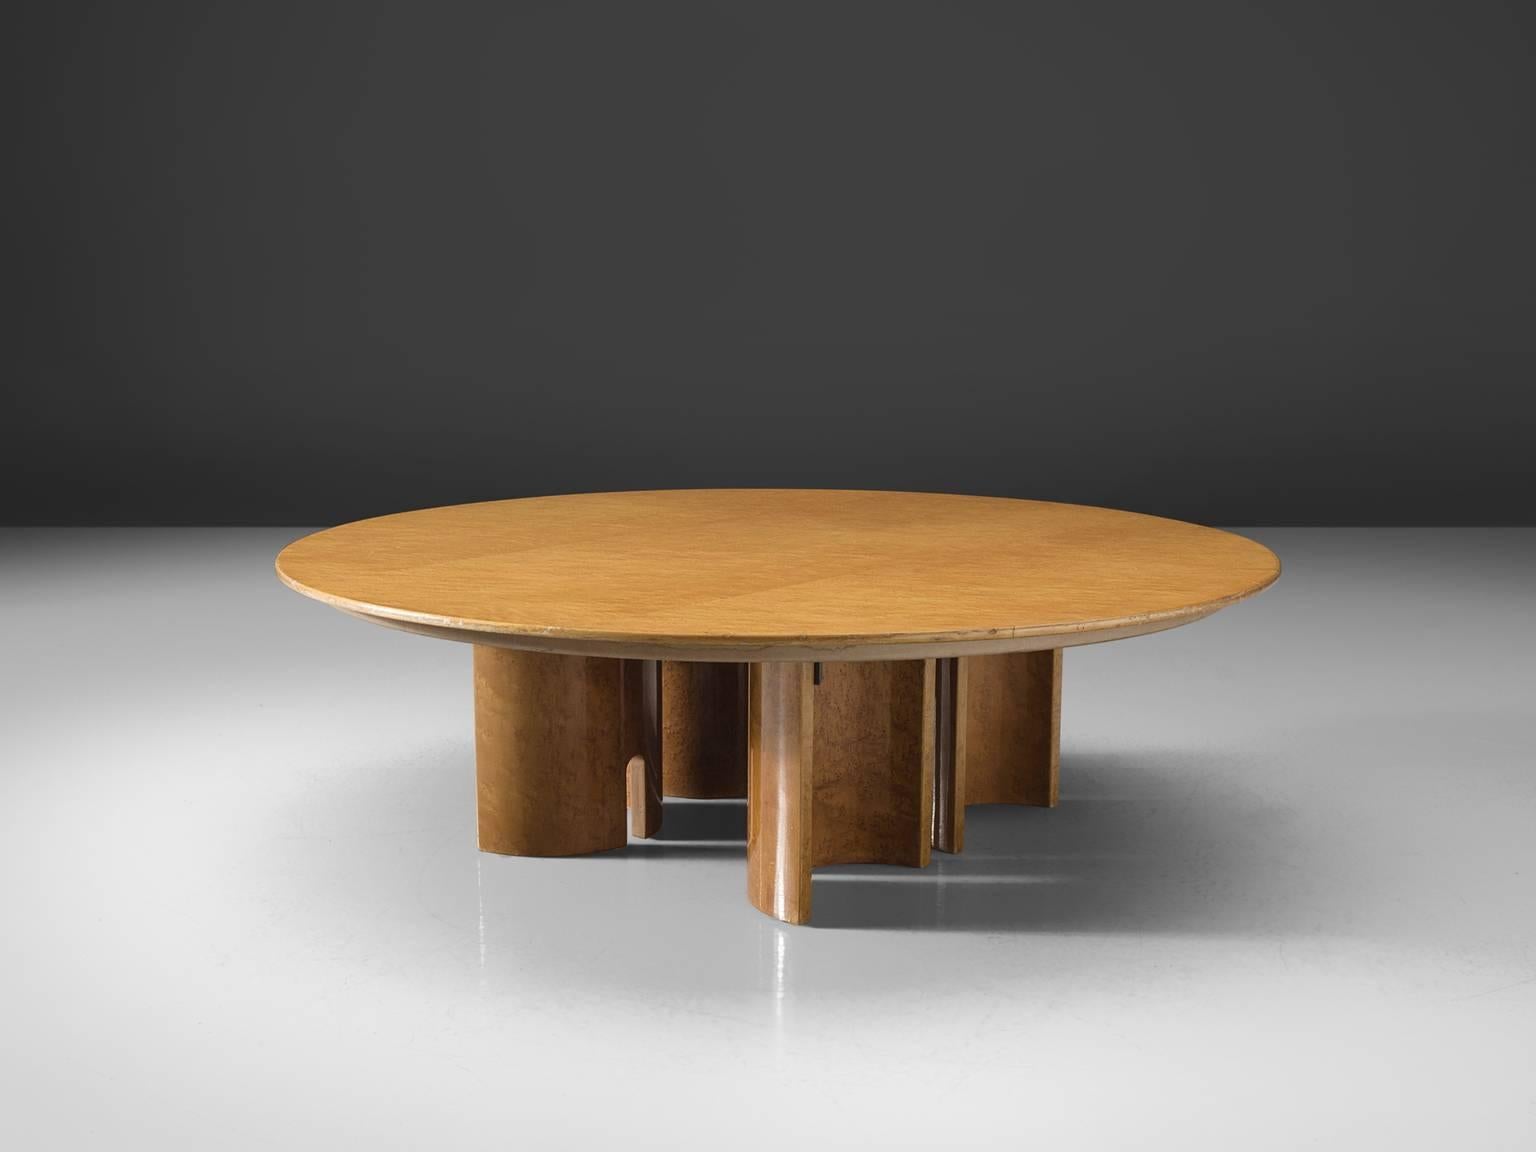 Giovanni Offredi for Saporiti, cocktail table, burl maple veneer, Italy, 1980s.

This sculptural table features semi-circular open legs, four in all. These sculptural legs support a thick round top. The table has a very architectural feel to it in